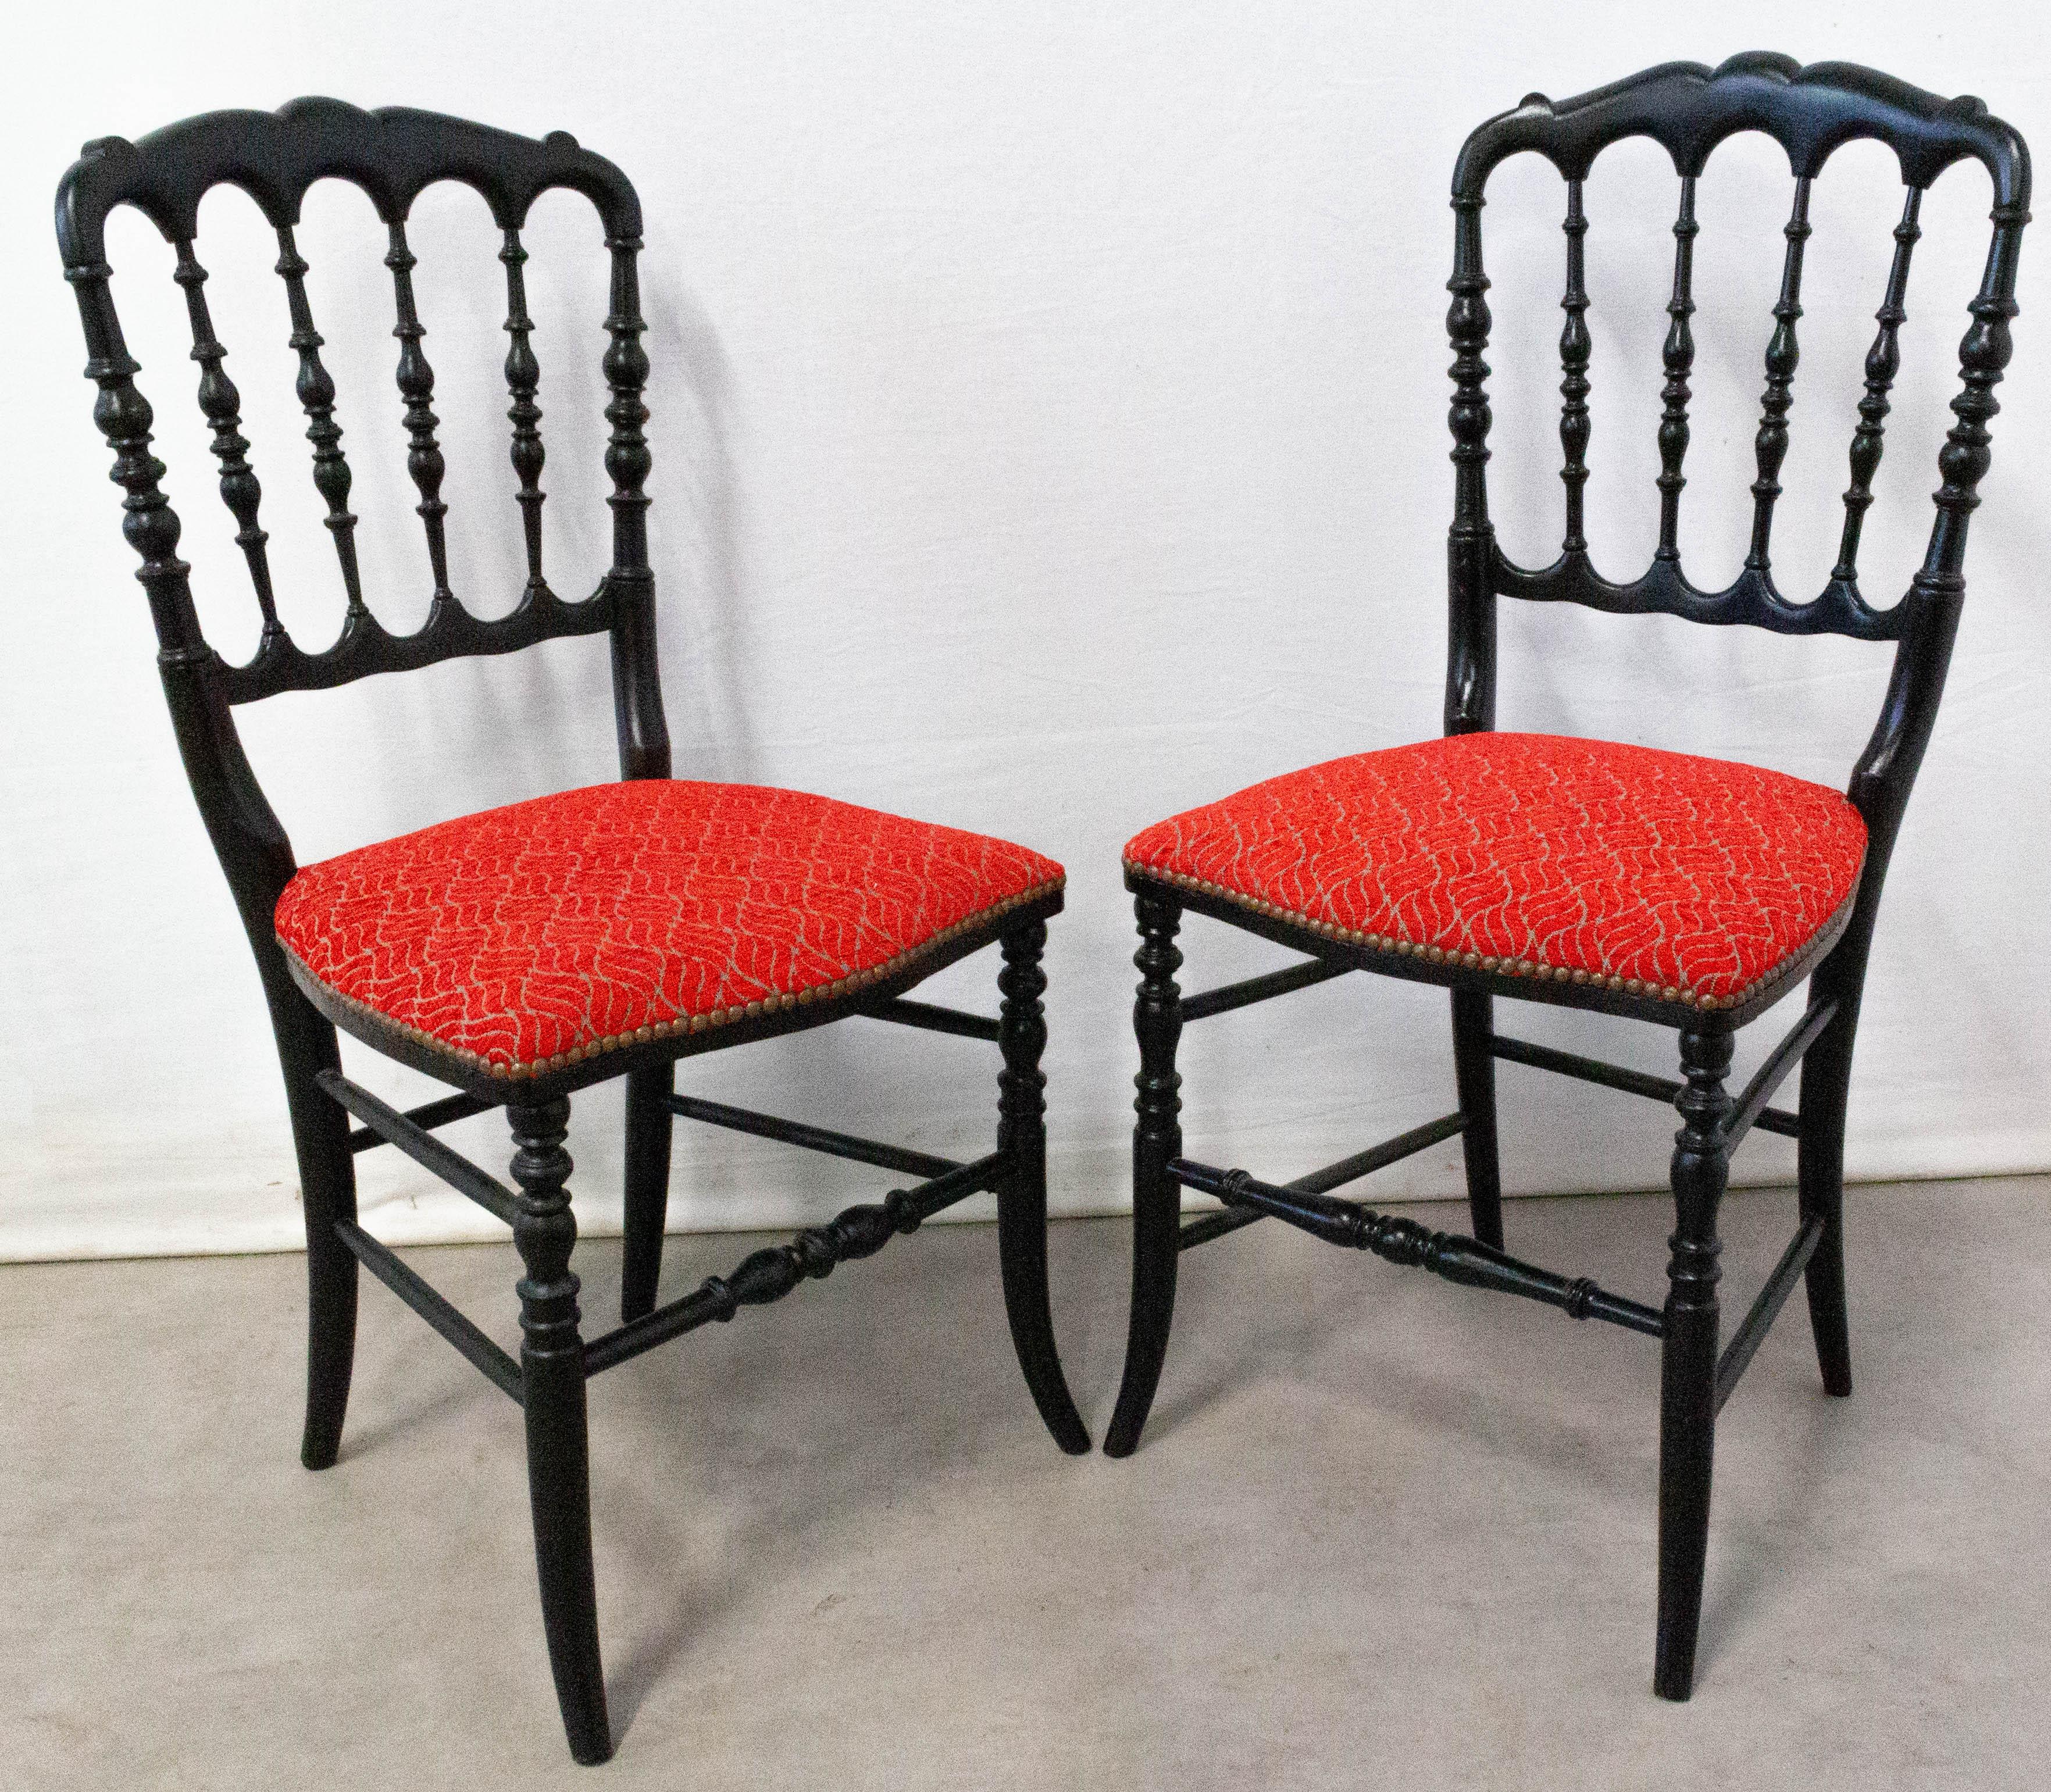 Napoleon III French red chairs late 19th century
The chair have been re-upholstered.
The chairs are similar but one is bigger than the other.
Chair 1: D 18.1 in ; (46 cm) W 16.5 in. (42 cm) H 34.2 in (87 cm).
Chair 2: D 18.1 in ; (46 cm) W 16.5